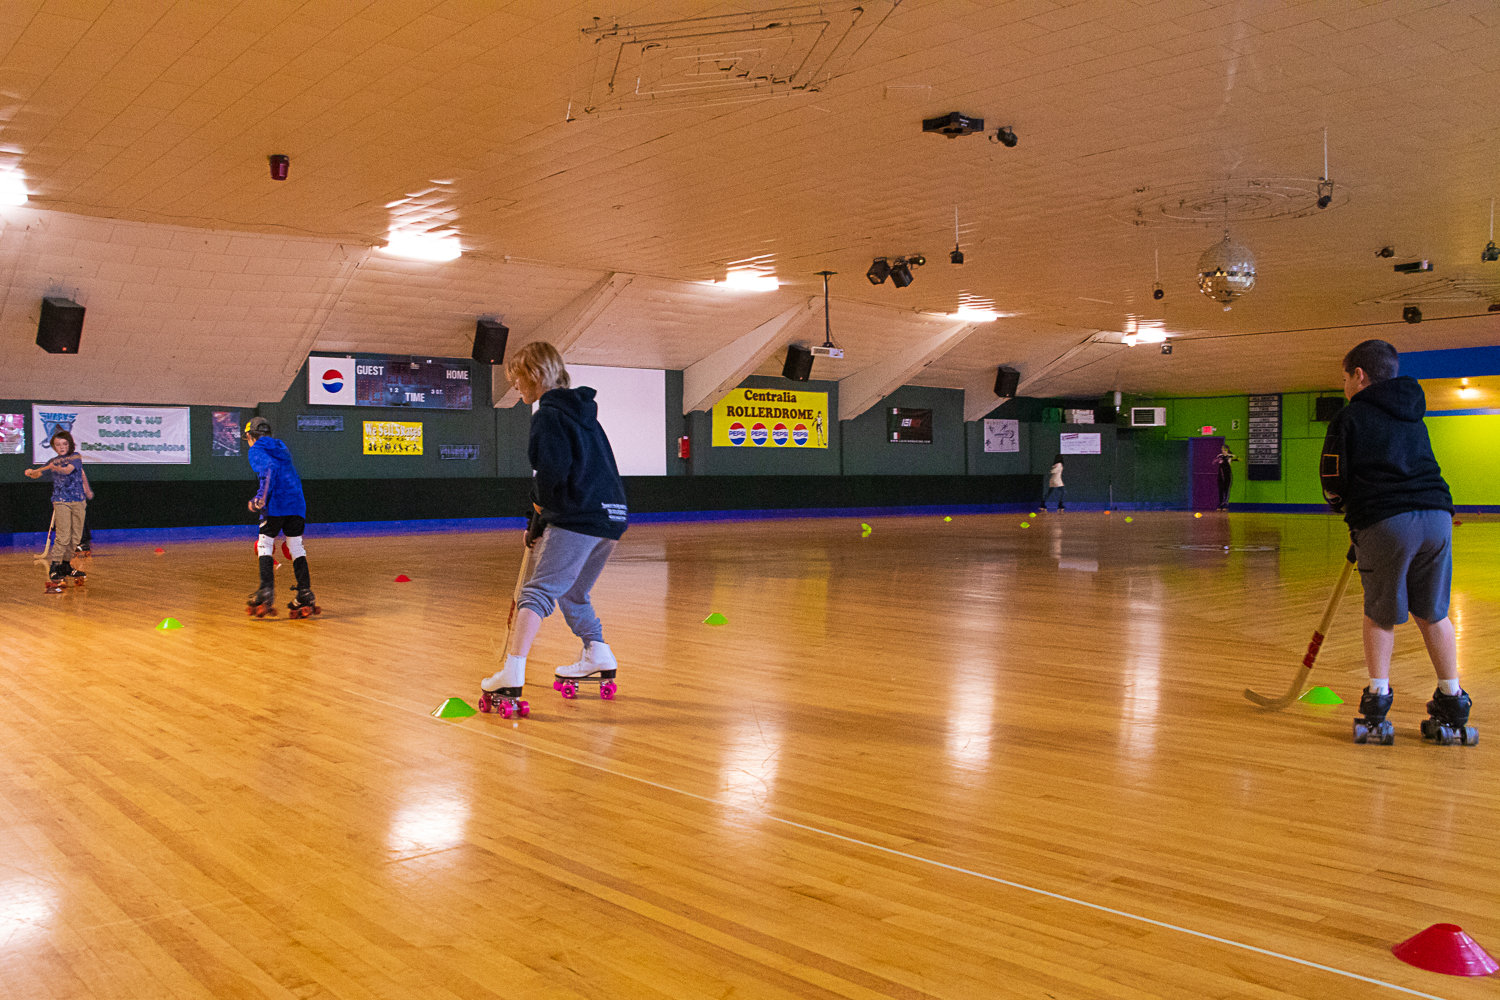 Members of the Centralia Sharks rollerhockey club meet every Saturday at the Centralia Rollerdome for practice.